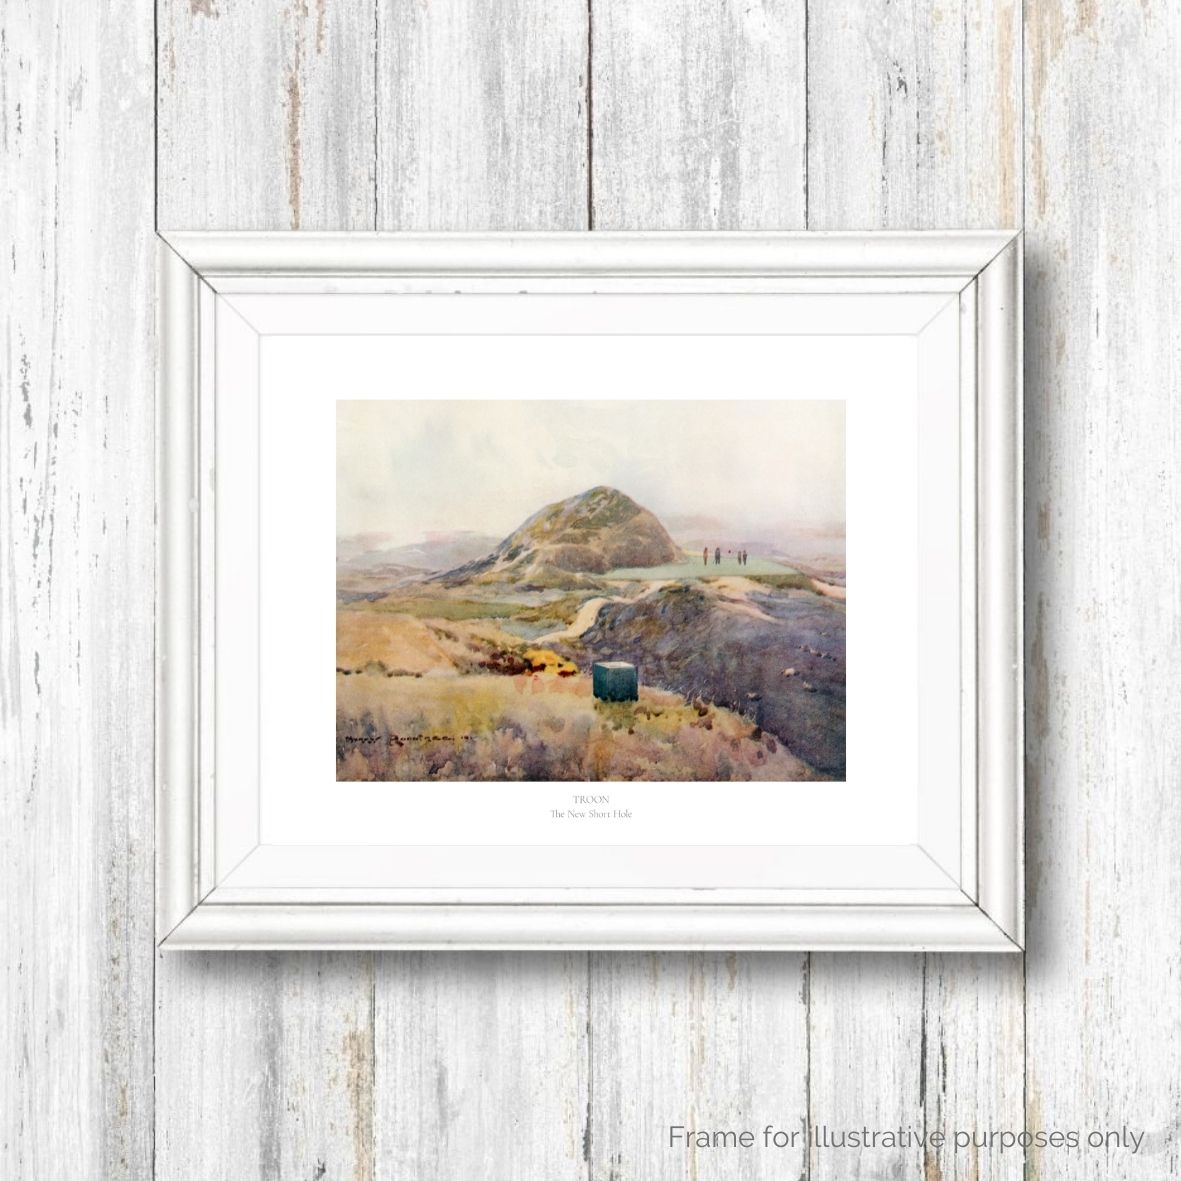 Royal Troon Golf Club framed print with text by Harry Rountree